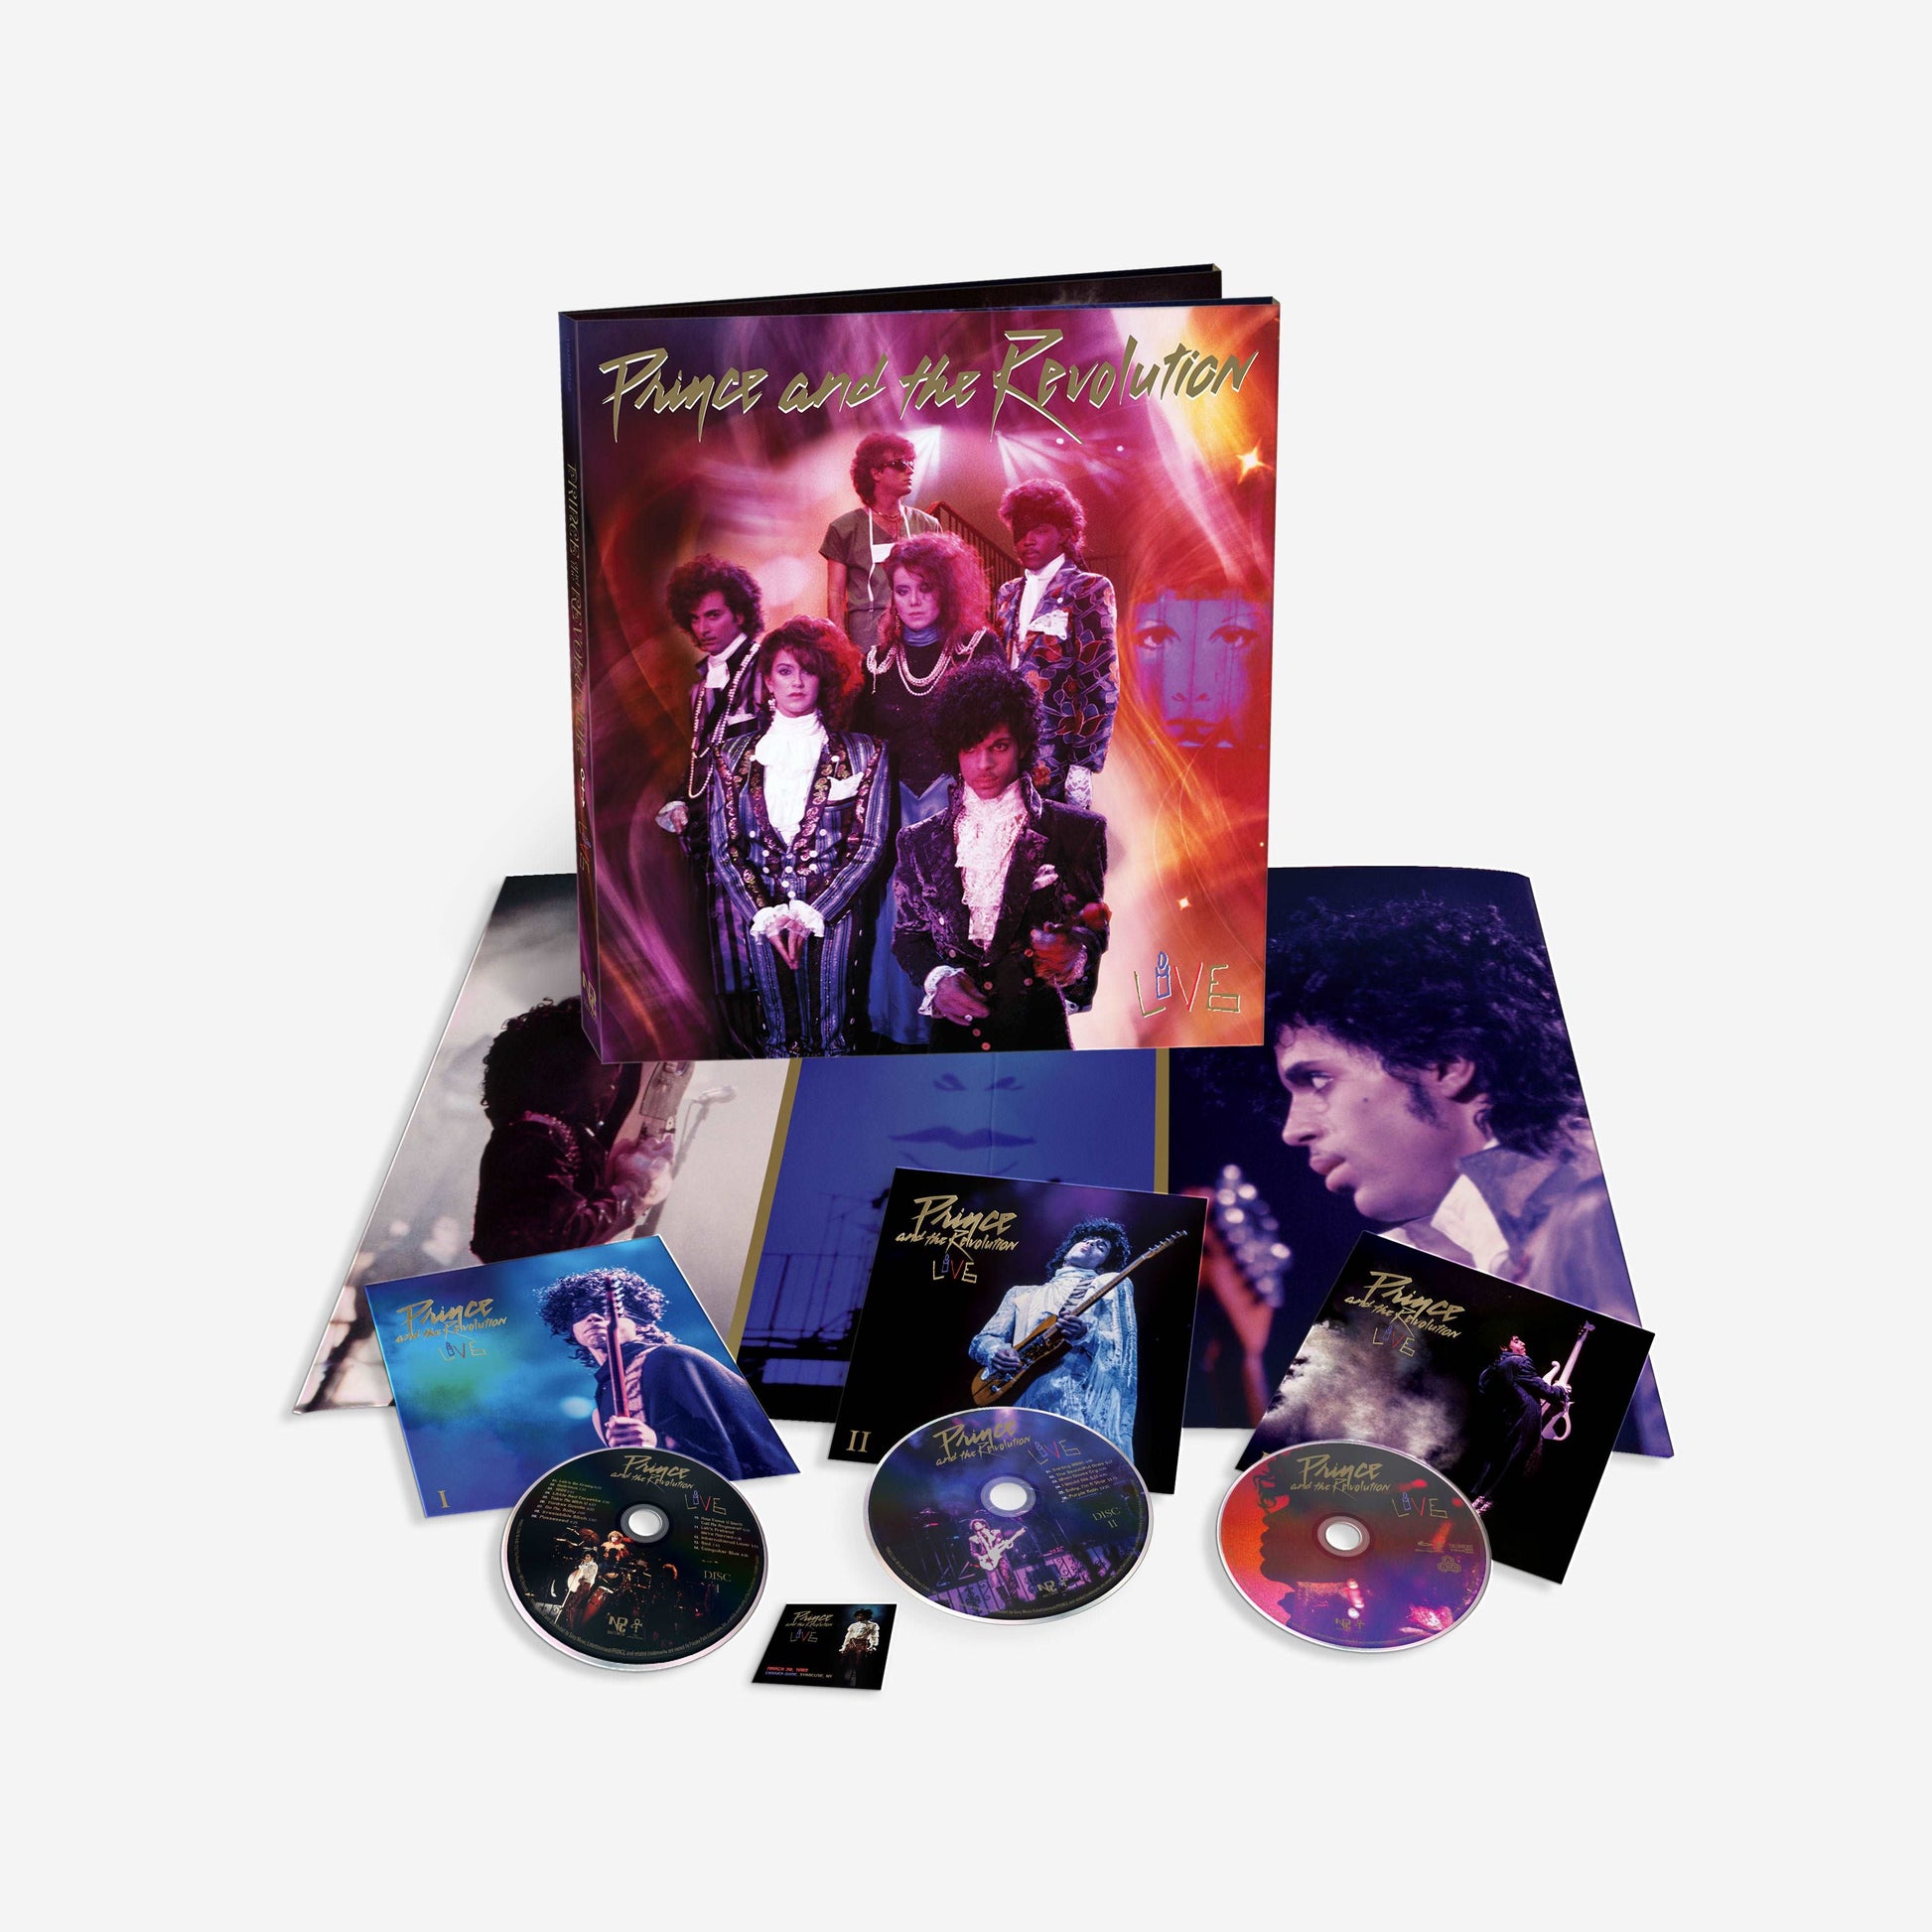 Prince - Prince and The Revolution - The Vault Collective ltd